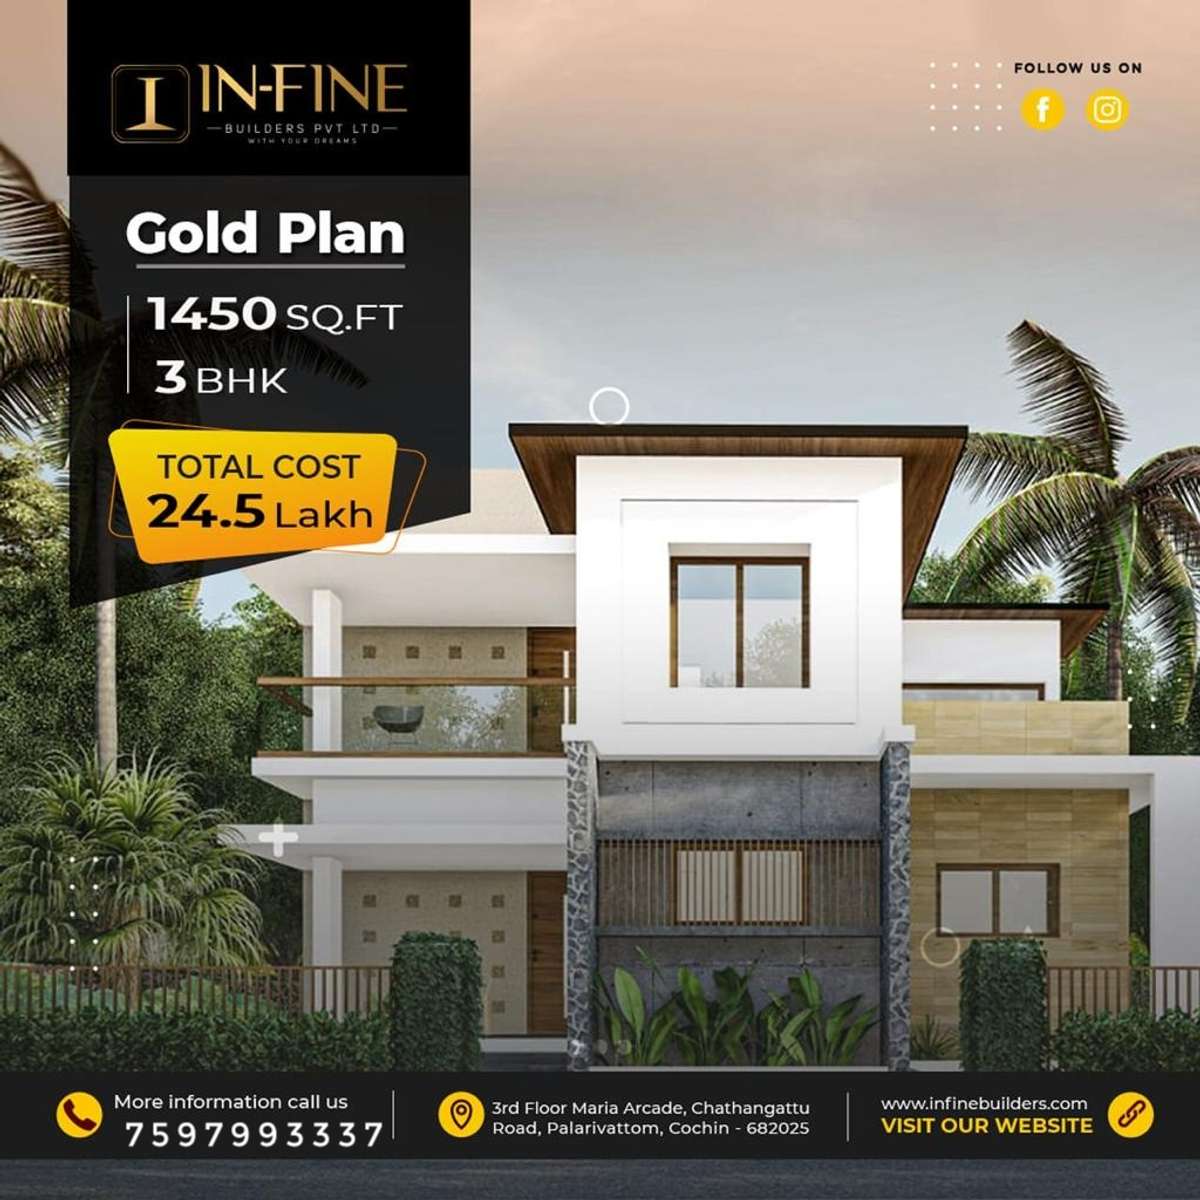 Are you in search of a good builders for your
Dream home🤷‍♂️ ??
Stop thinking and here we are to fulfill your dream.

Turn key Project 
1450sqft 
(3BHK) 
24.5 Lakhs 
.
*Conditions Apply *


Infine Builders Pvt. Ltd
 
For more details:- 7594993337

Message Infine Builders on WhatsApp
https://wa.me/message/E7ULQCGVERYXF1